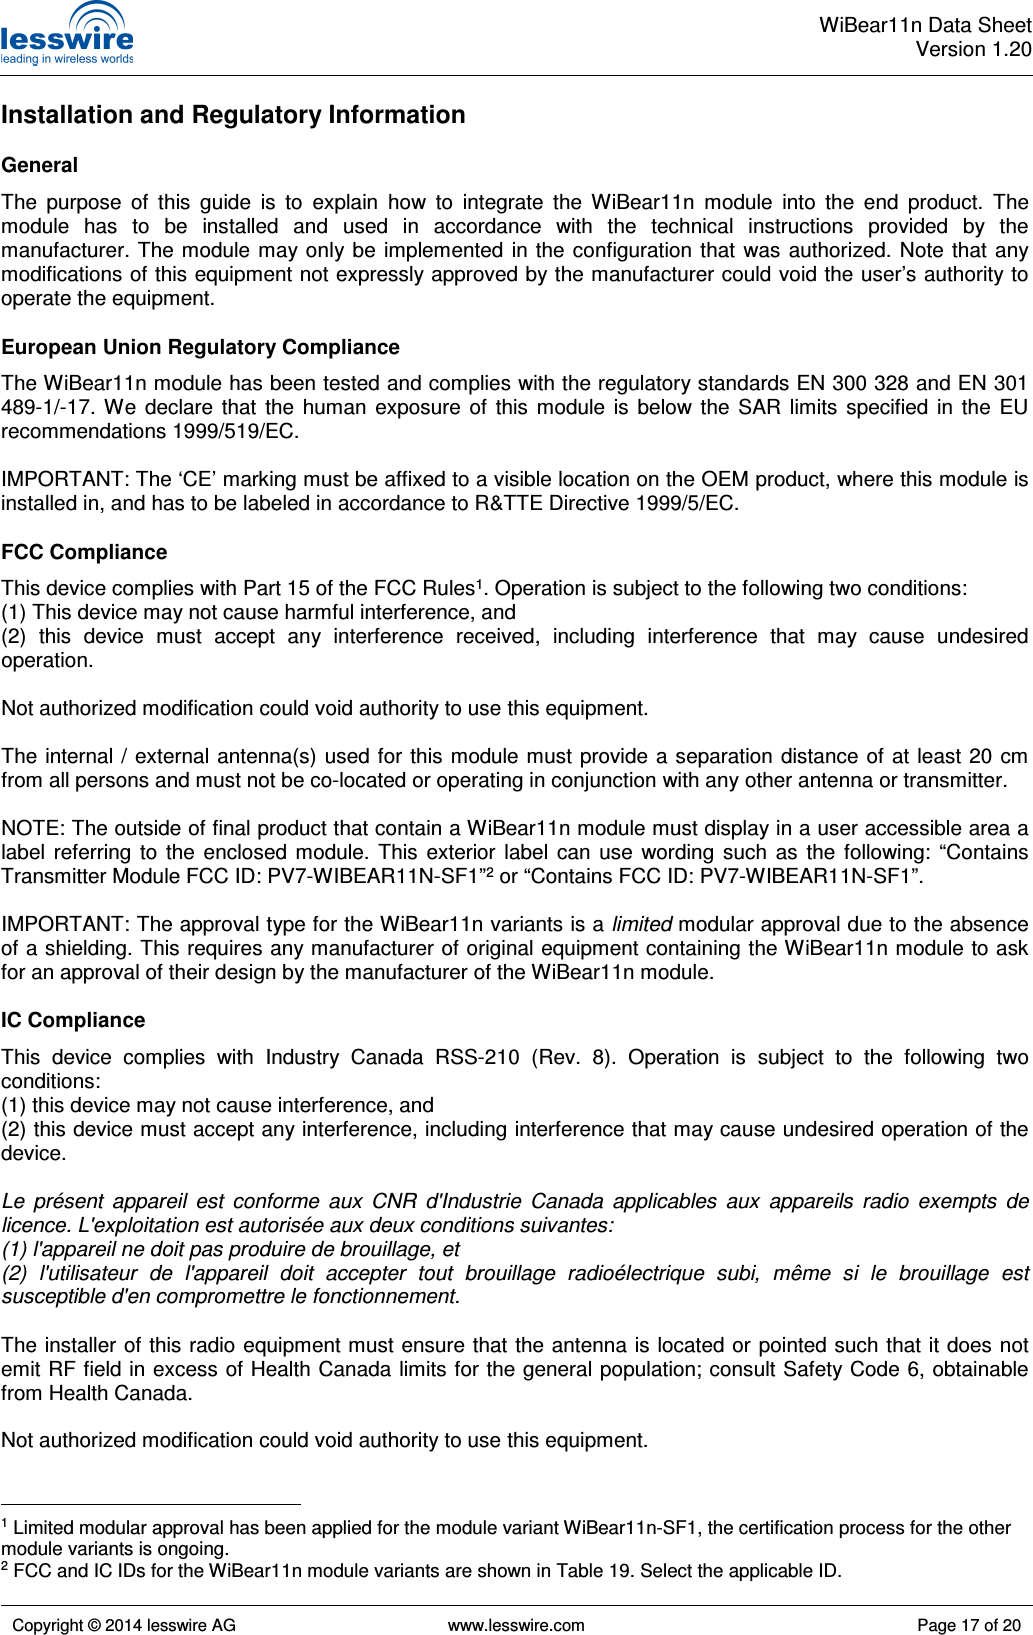  WiBear11n Data SheetVersion 1.20   Copyright © 2014 lesswire AG   www.lesswire.com  Page 17 of 20  Installation and Regulatory Information General The  purpose  of  this  guide  is  to  explain  how  to  integrate  the  WiBear11n  module  into  the  end  product.  The module  has  to  be  installed  and  used  in  accordance  with  the  technical  instructions  provided  by  the manufacturer. The module may only be  implemented  in  the configuration  that  was authorized. Note that any modifications of this equipment not expressly approved by the manufacturer could void the user’s authority to operate the equipment. European Union Regulatory Compliance The WiBear11n module has been tested and complies with the regulatory standards EN 300 328 and EN 301 489-1/-17.  We  declare  that  the  human  exposure  of  this  module  is  below  the  SAR  limits  specified  in  the  EU recommendations 1999/519/EC.  IMPORTANT: The ‘CE’ marking must be affixed to a visible location on the OEM product, where this module is installed in, and has to be labeled in accordance to R&amp;TTE Directive 1999/5/EC. FCC Compliance This device complies with Part 15 of the FCC Rules1. Operation is subject to the following two conditions: (1) This device may not cause harmful interference, and (2)  this  device  must  accept  any  interference  received,  including  interference  that  may  cause  undesired operation.  Not authorized modification could void authority to use this equipment.  The  internal / external antenna(s) used  for  this module must  provide a separation  distance  of at  least 20  cm from all persons and must not be co-located or operating in conjunction with any other antenna or transmitter.  NOTE: The outside of final product that contain a WiBear11n module must display in a user accessible area a label  referring  to  the  enclosed  module.  This  exterior  label  can  use  wording  such  as  the  following:  “Contains Transmitter Module FCC ID: PV7-WIBEAR11N-SF1”2 or “Contains FCC ID: PV7-WIBEAR11N-SF1”.  IMPORTANT: The approval type for the WiBear11n variants is a limited modular approval due to the absence of a shielding. This requires any manufacturer of original equipment containing the WiBear11n module to ask for an approval of their design by the manufacturer of the WiBear11n module. IC Compliance This  device  complies  with  Industry  Canada  RSS-210  (Rev.  8).  Operation  is  subject  to  the  following  two conditions: (1) this device may not cause interference, and (2) this device must accept any interference, including interference that may cause undesired operation of the device.  Le  présent  appareil  est  conforme  aux  CNR  d&apos;Industrie  Canada  applicables  aux  appareils  radio  exempts  de licence. L&apos;exploitation est autorisée aux deux conditions suivantes: (1) l&apos;appareil ne doit pas produire de brouillage, et (2)  l&apos;utilisateur  de  l&apos;appareil  doit  accepter  tout  brouillage  radioélectrique  subi,  même  si  le  brouillage  est susceptible d&apos;en compromettre le fonctionnement.  The installer of this radio equipment must ensure that the antenna is located or pointed such that it does not emit RF field in excess of Health Canada limits for the general population; consult Safety Code 6, obtainable from Health Canada.  Not authorized modification could void authority to use this equipment.                                                   1 Limited modular approval has been applied for the module variant WiBear11n-SF1, the certification process for the other module variants is ongoing. 2 FCC and IC IDs for the WiBear11n module variants are shown in Table 19. Select the applicable ID. 